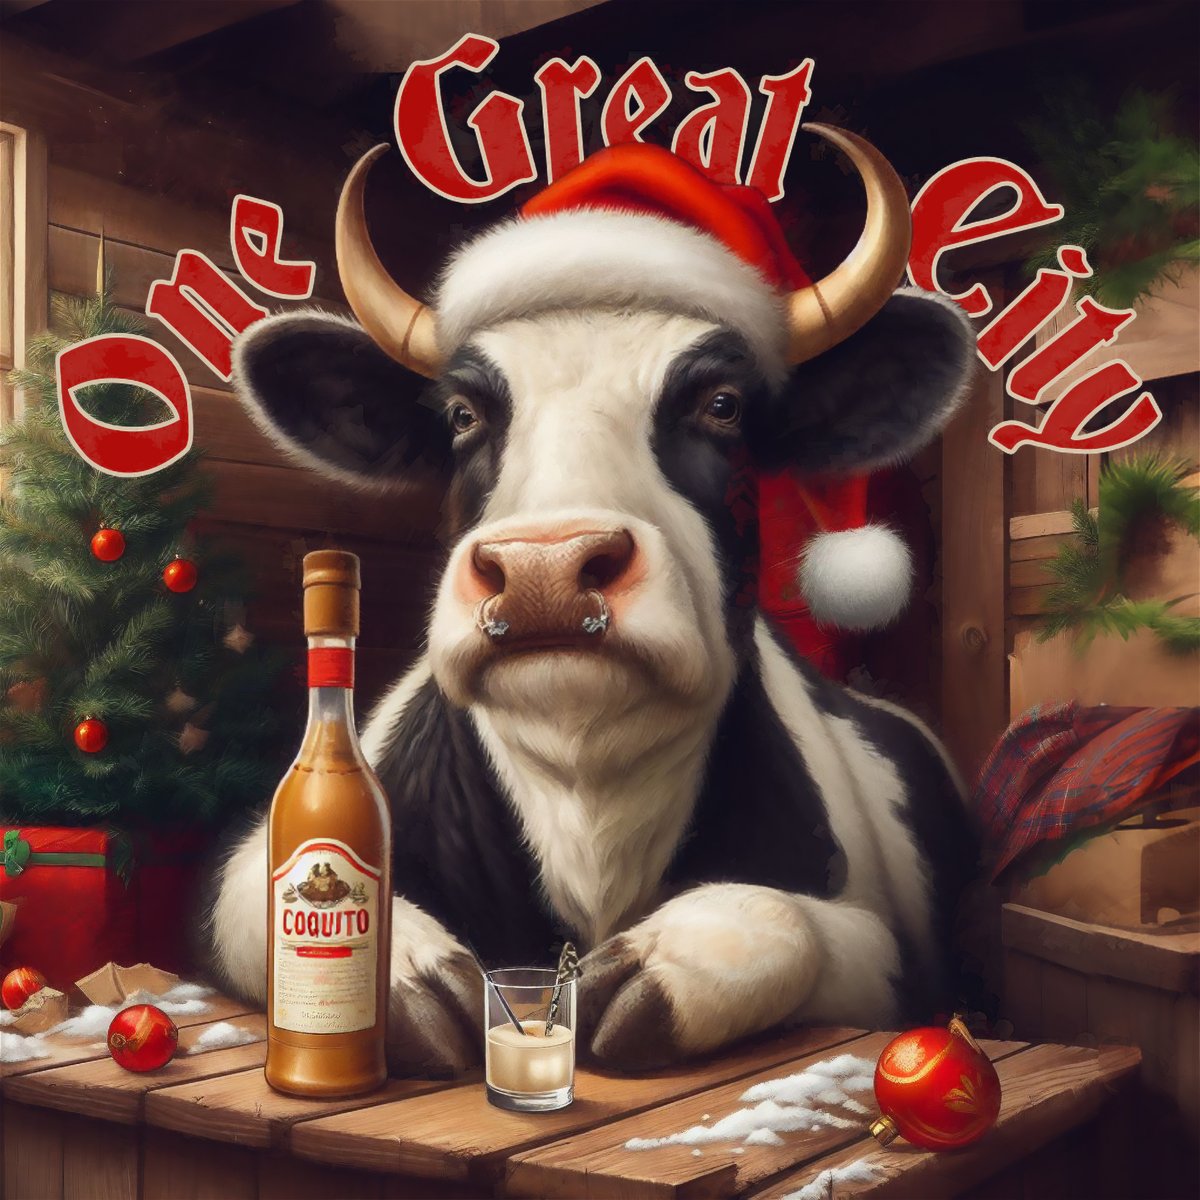 Hey just a reminder that tonight is cask night at the brewery and we'll be making a Coquito cow! Our Stout, evaporated milk, some dark rum, spices, and coconut, will make this a fairly festive feeling cask.